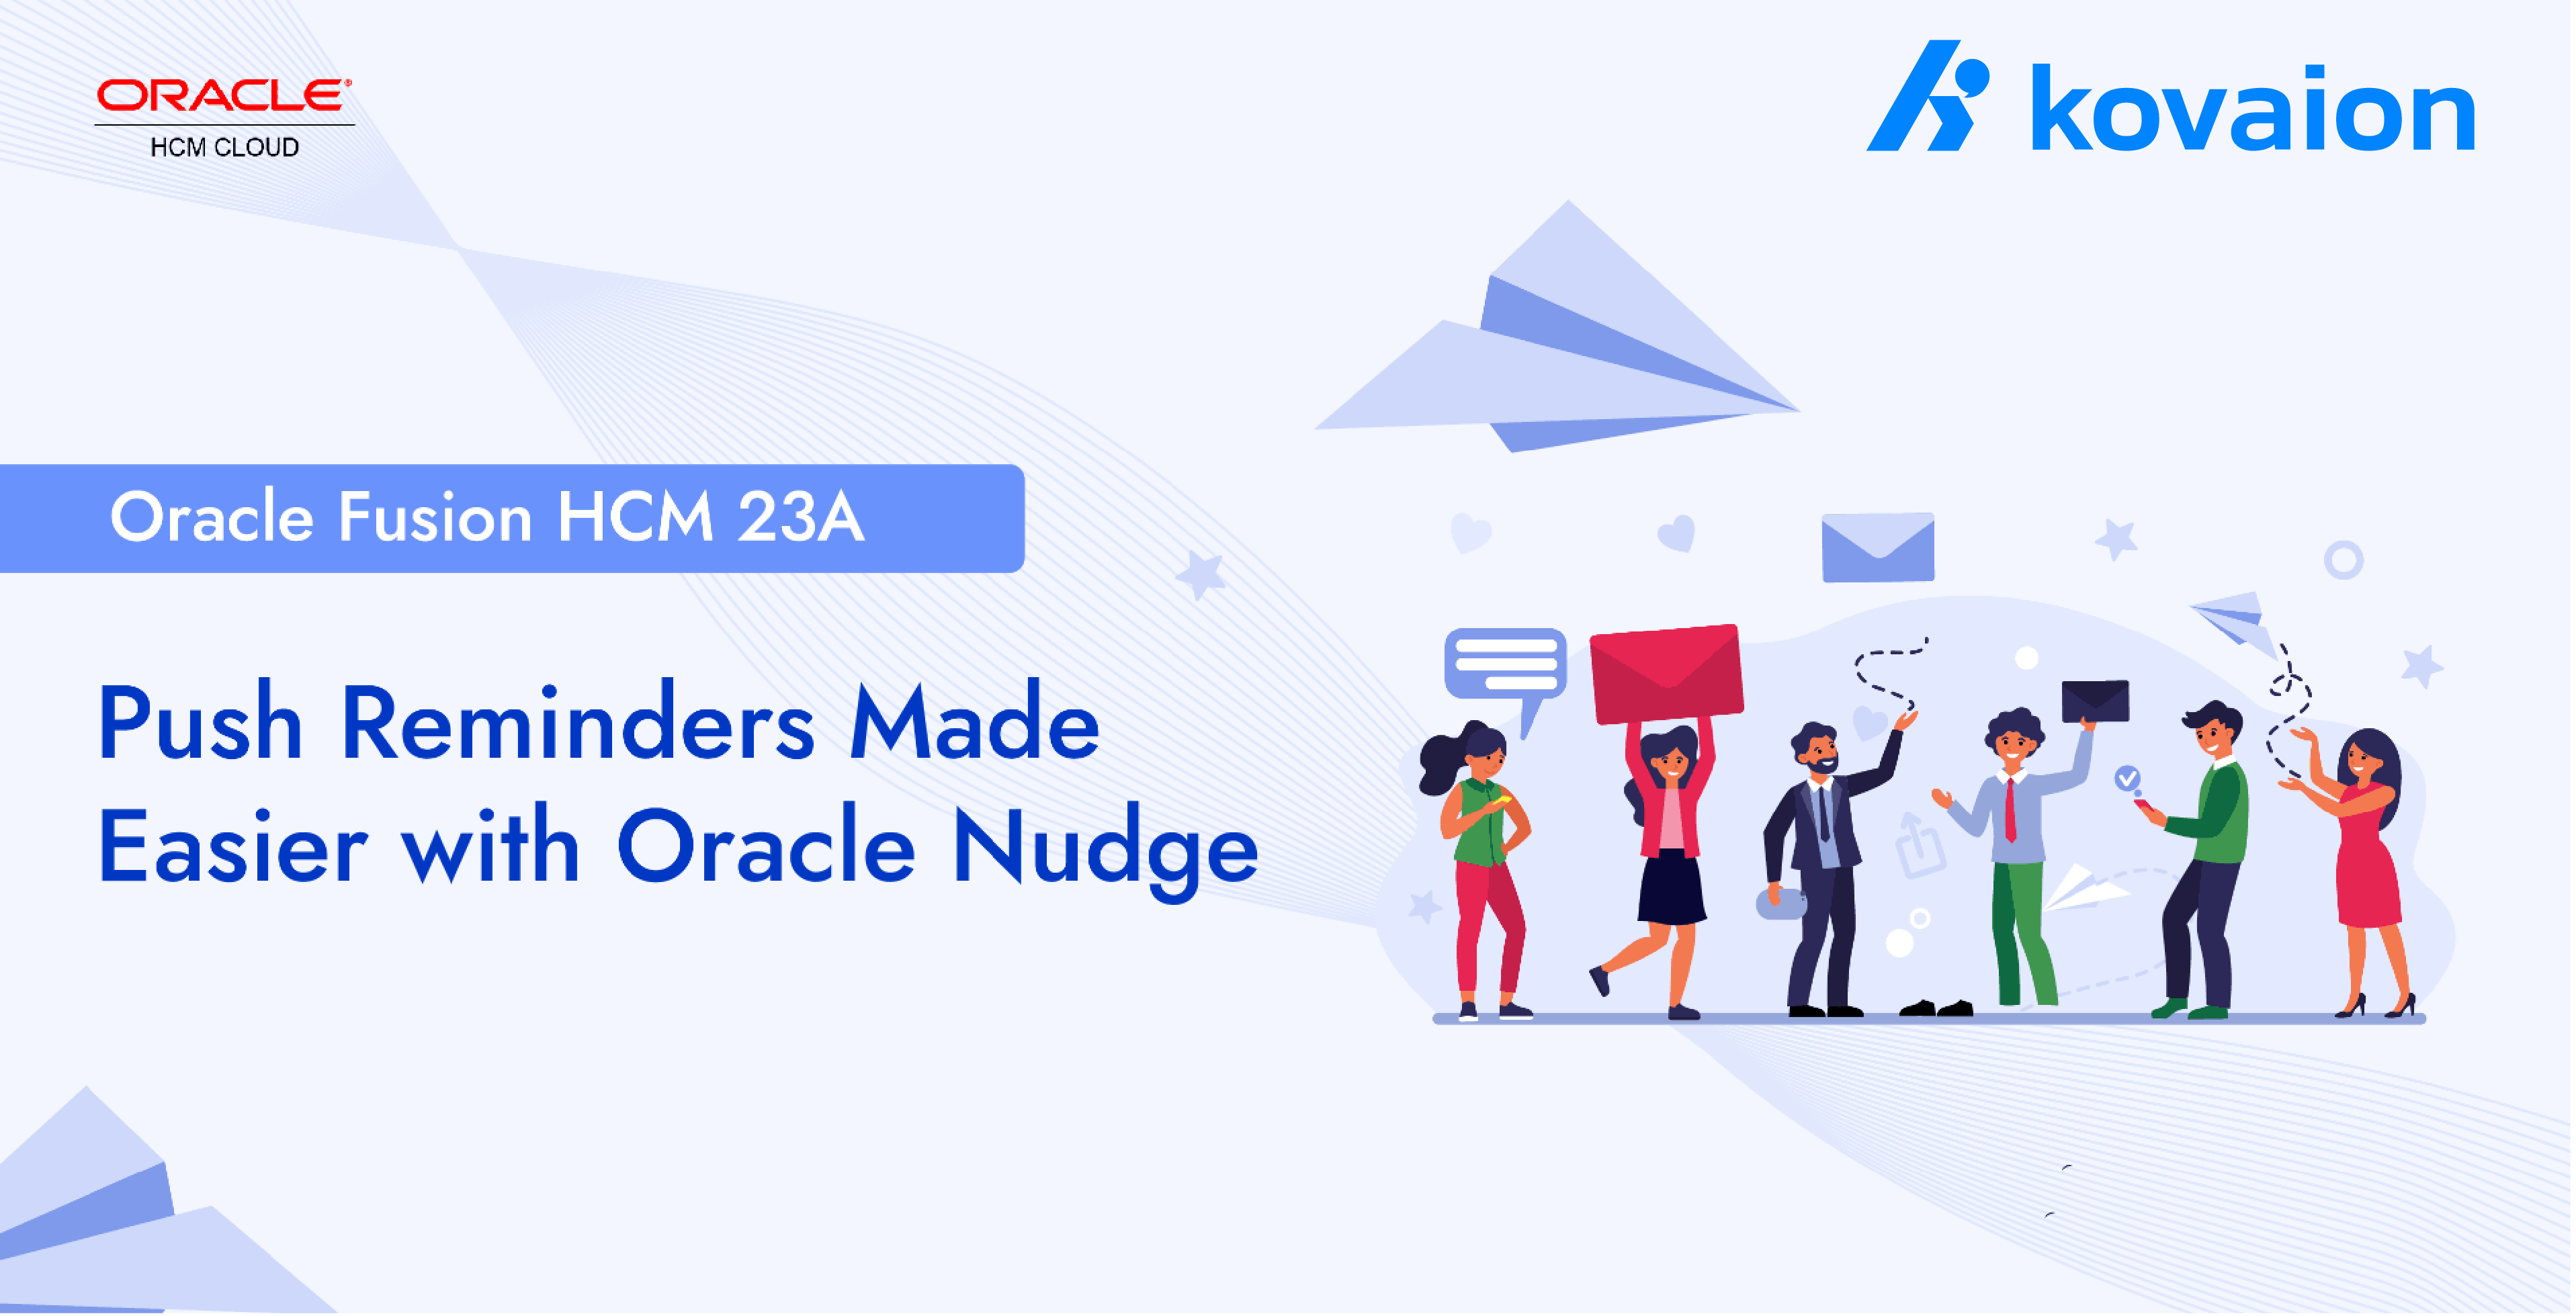 Oracle-Fusion-HCM-23A-Push-Reminders-Made-Easier-with-Oracle-Nudge